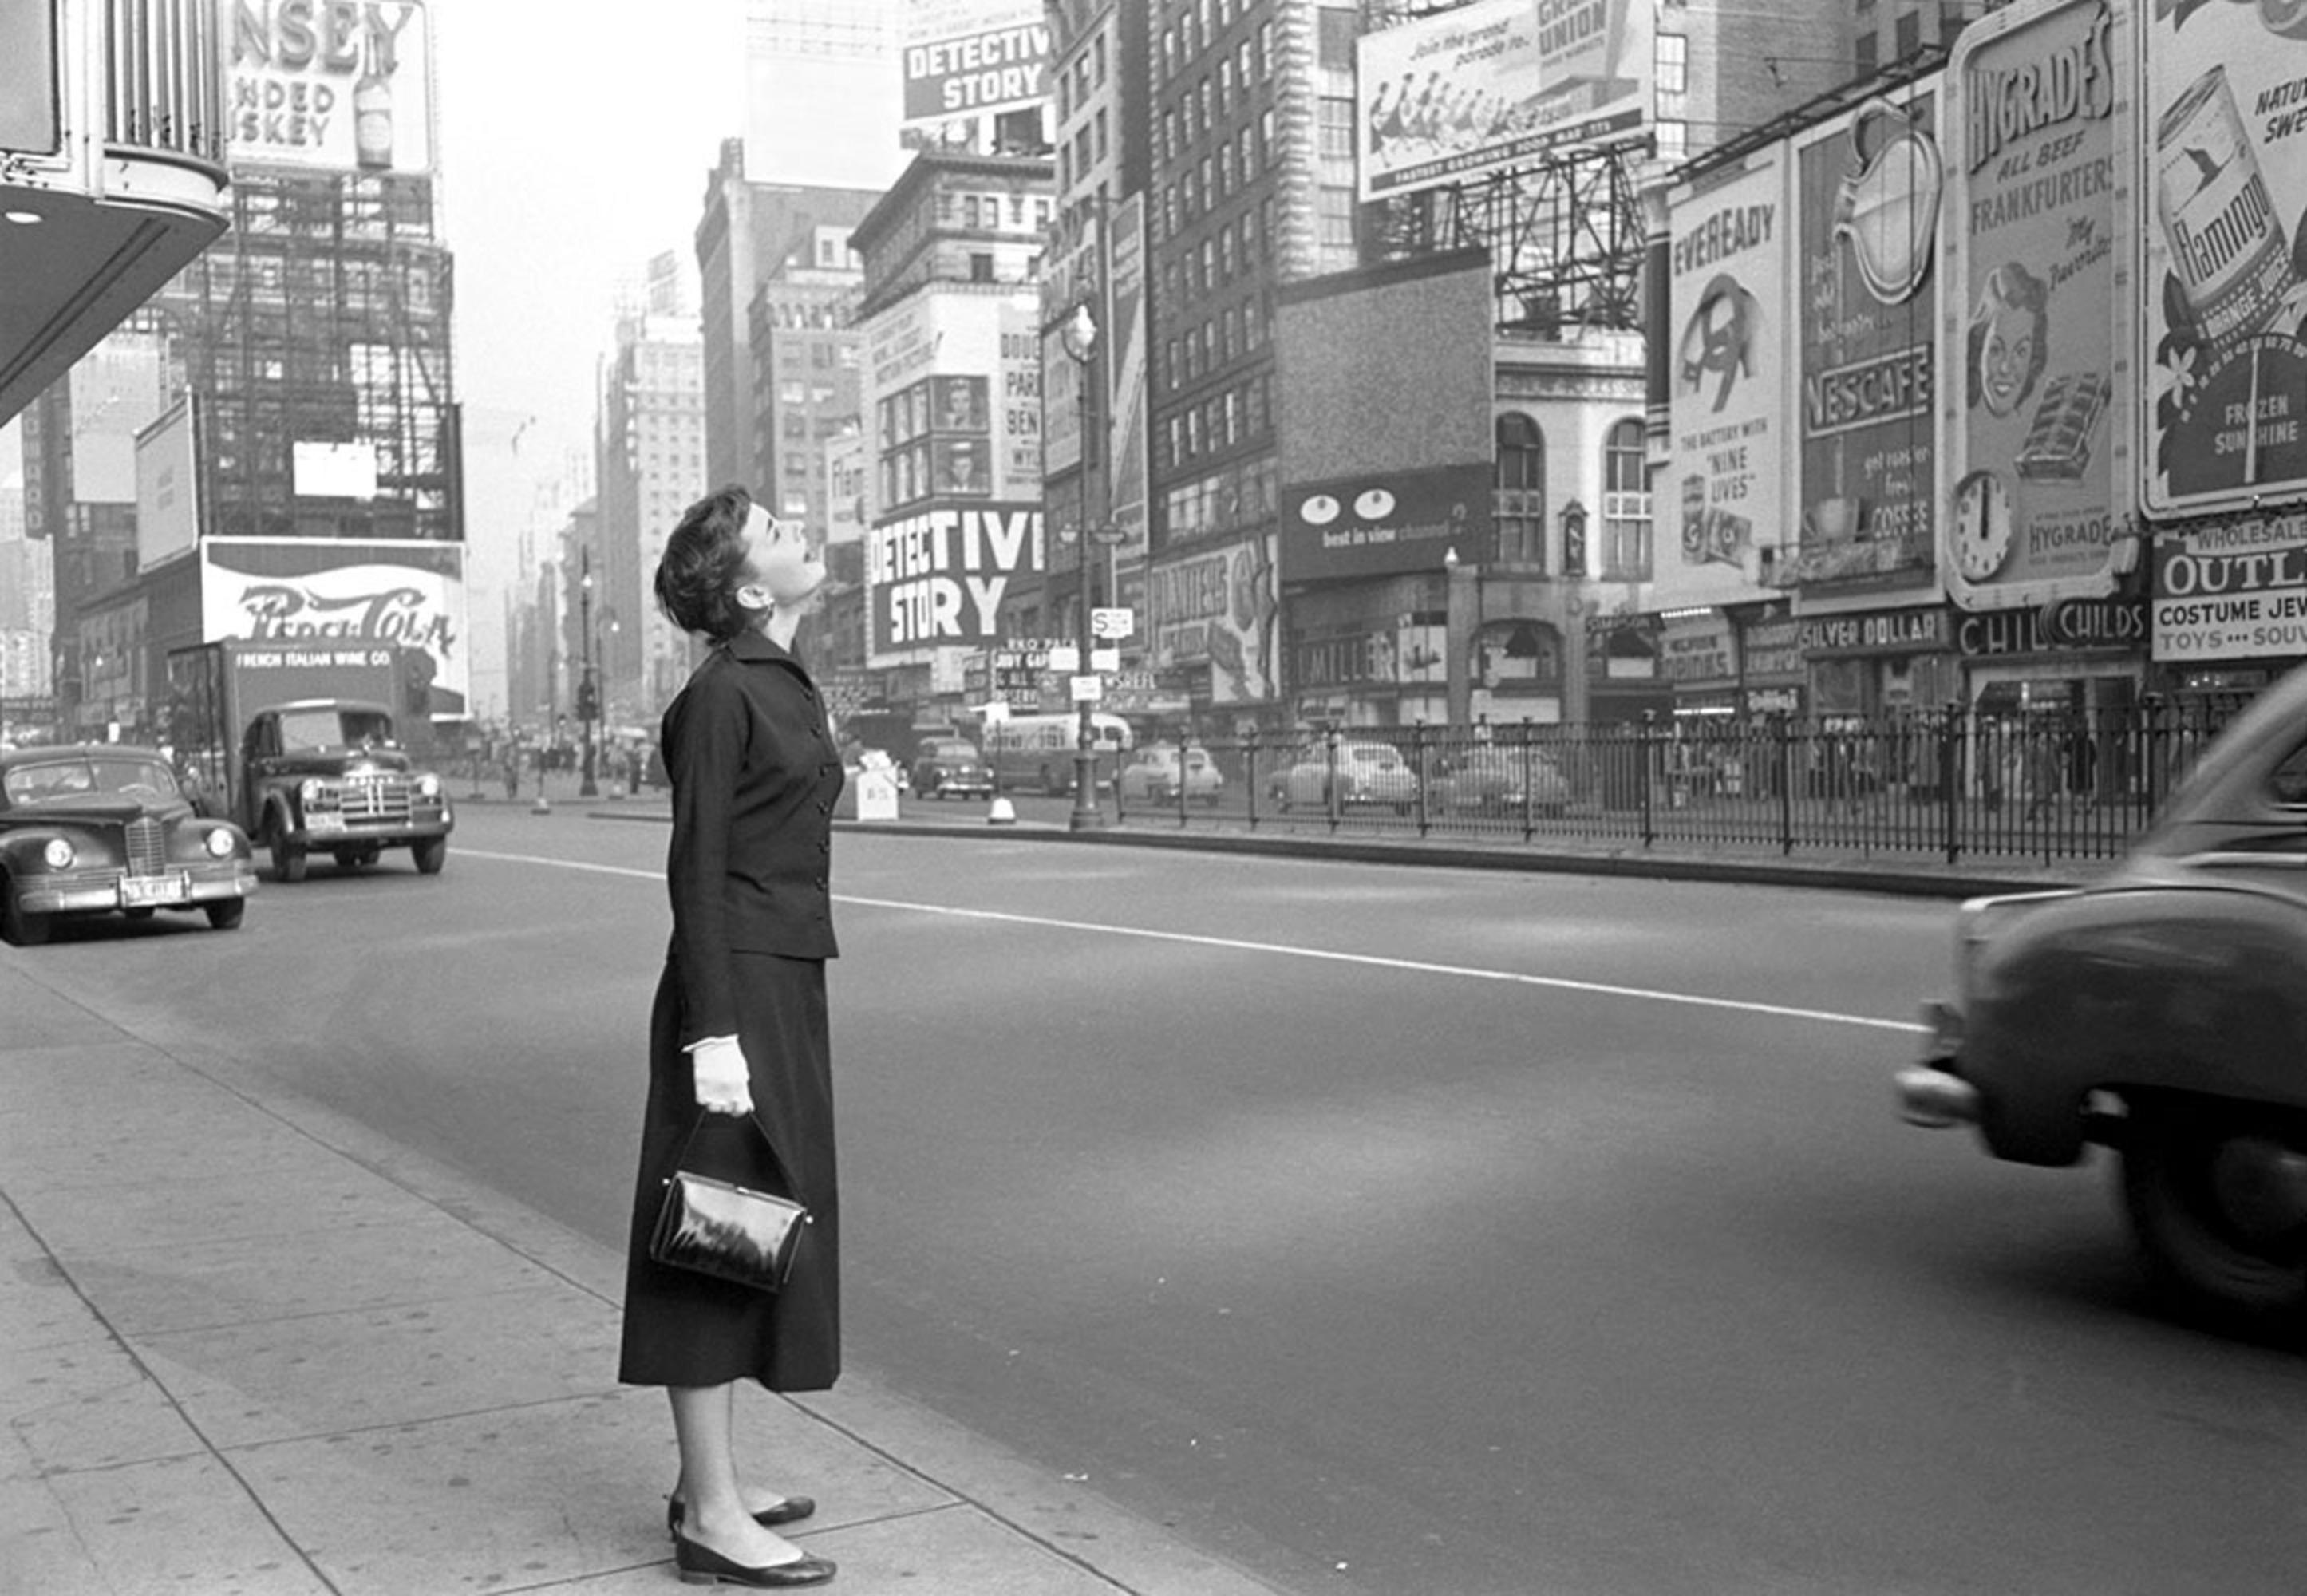 Gelatin-silver print

Times Square, NYC, 1951.

Available Sizes:
12" x 16” Edition of 25
16” x 20” Edition of 25
20" x 24” Edition of 25
30” x 40” Edition of 25

This photograph will be printed once payment has been received and will ship directly